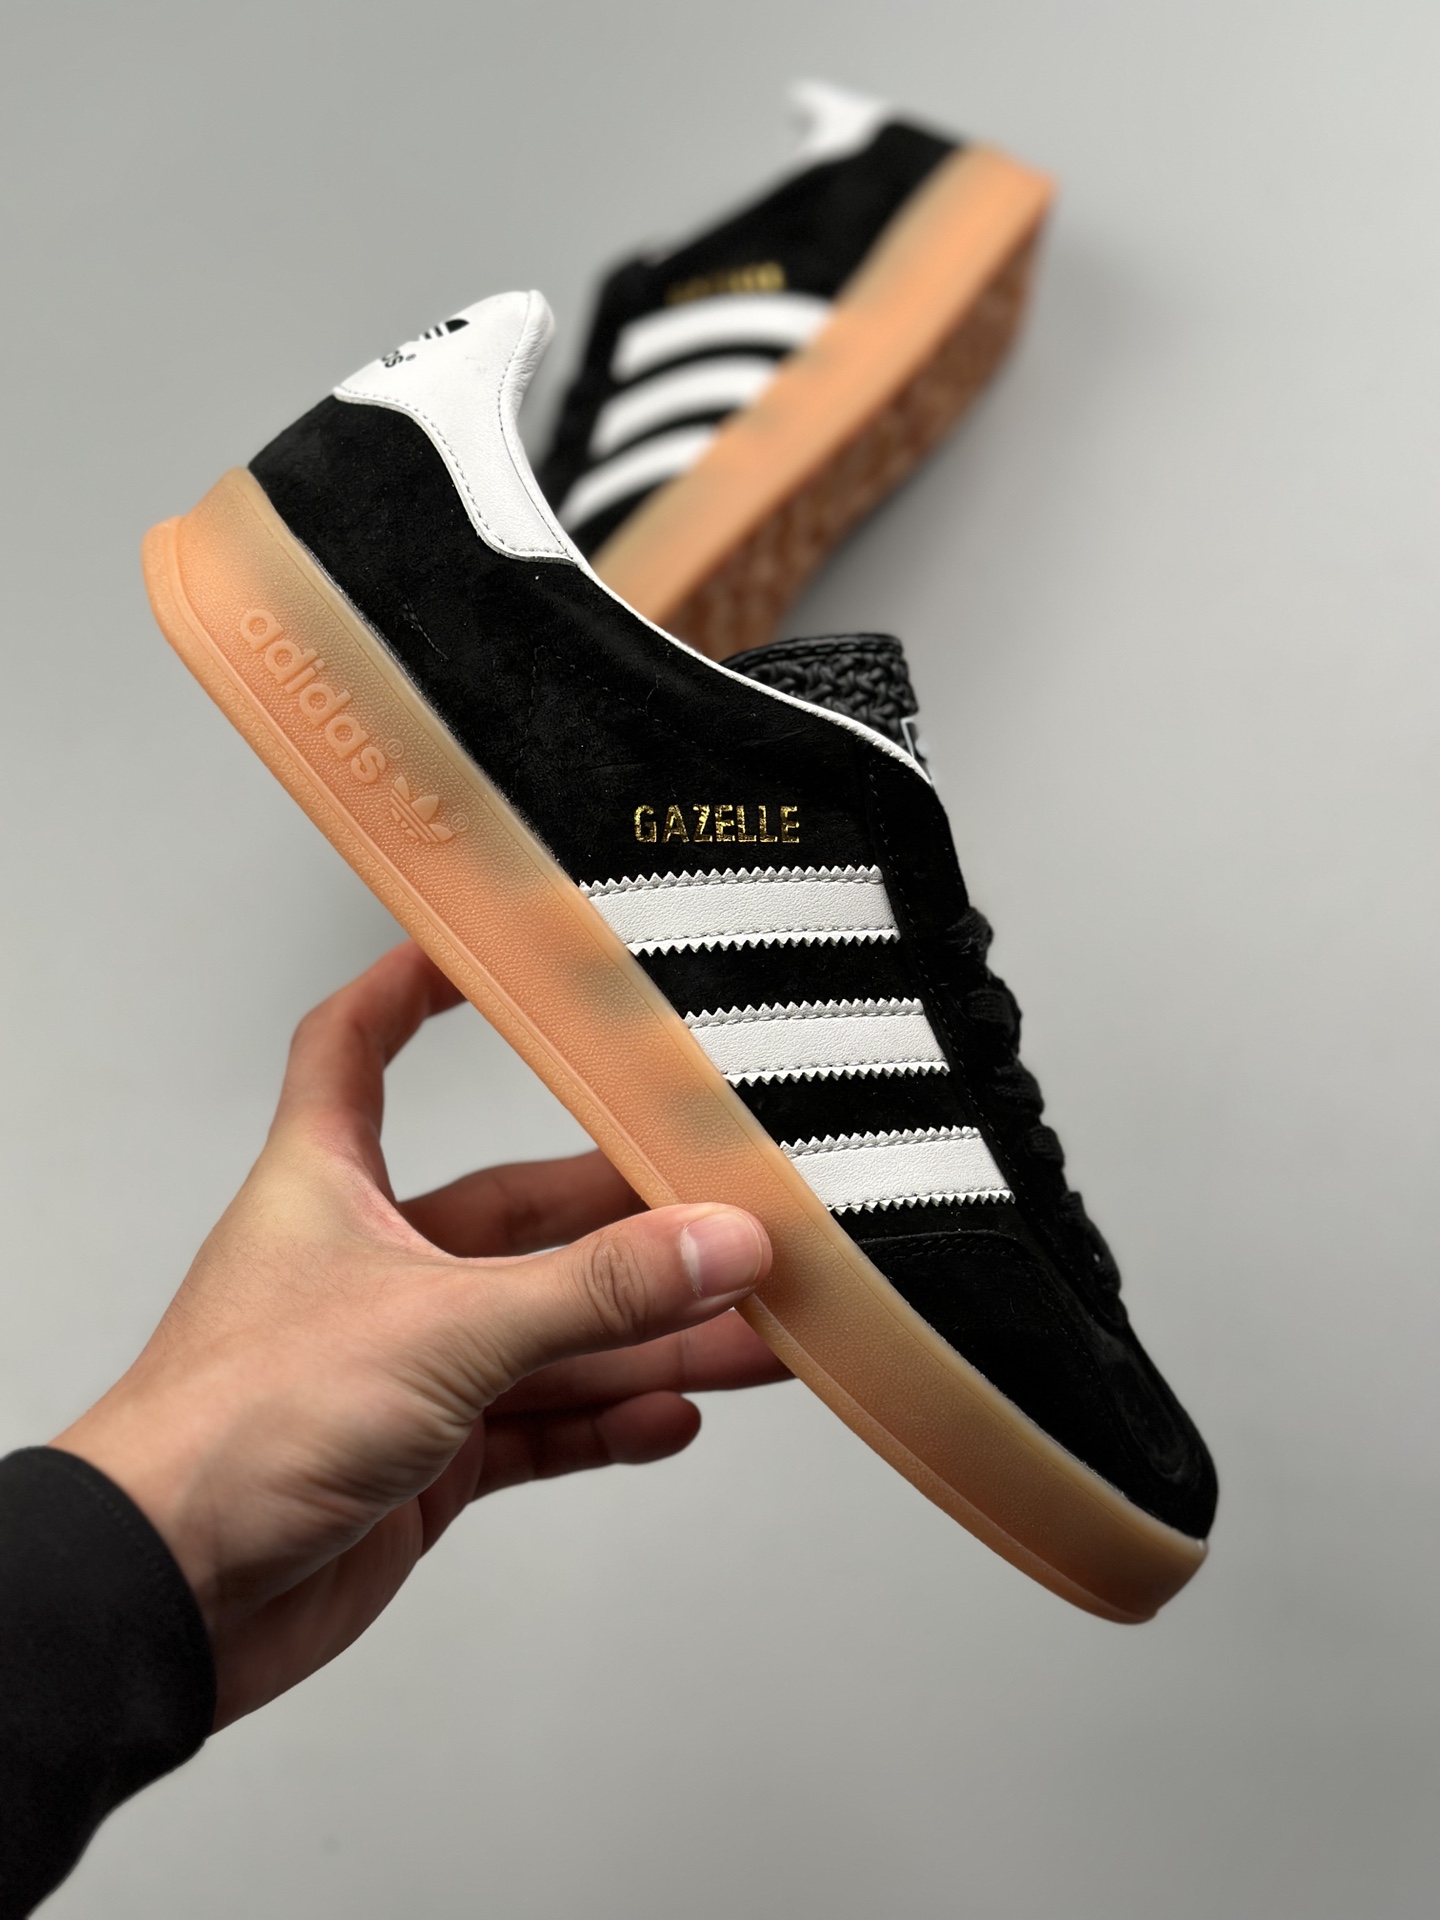 Adidas Gazelle W Adidas official store ph Authentic original shoes for men women flagship store running shoes New sale COD sneakers Low Cut leisure new arrival rubber basketball | Lazada PH